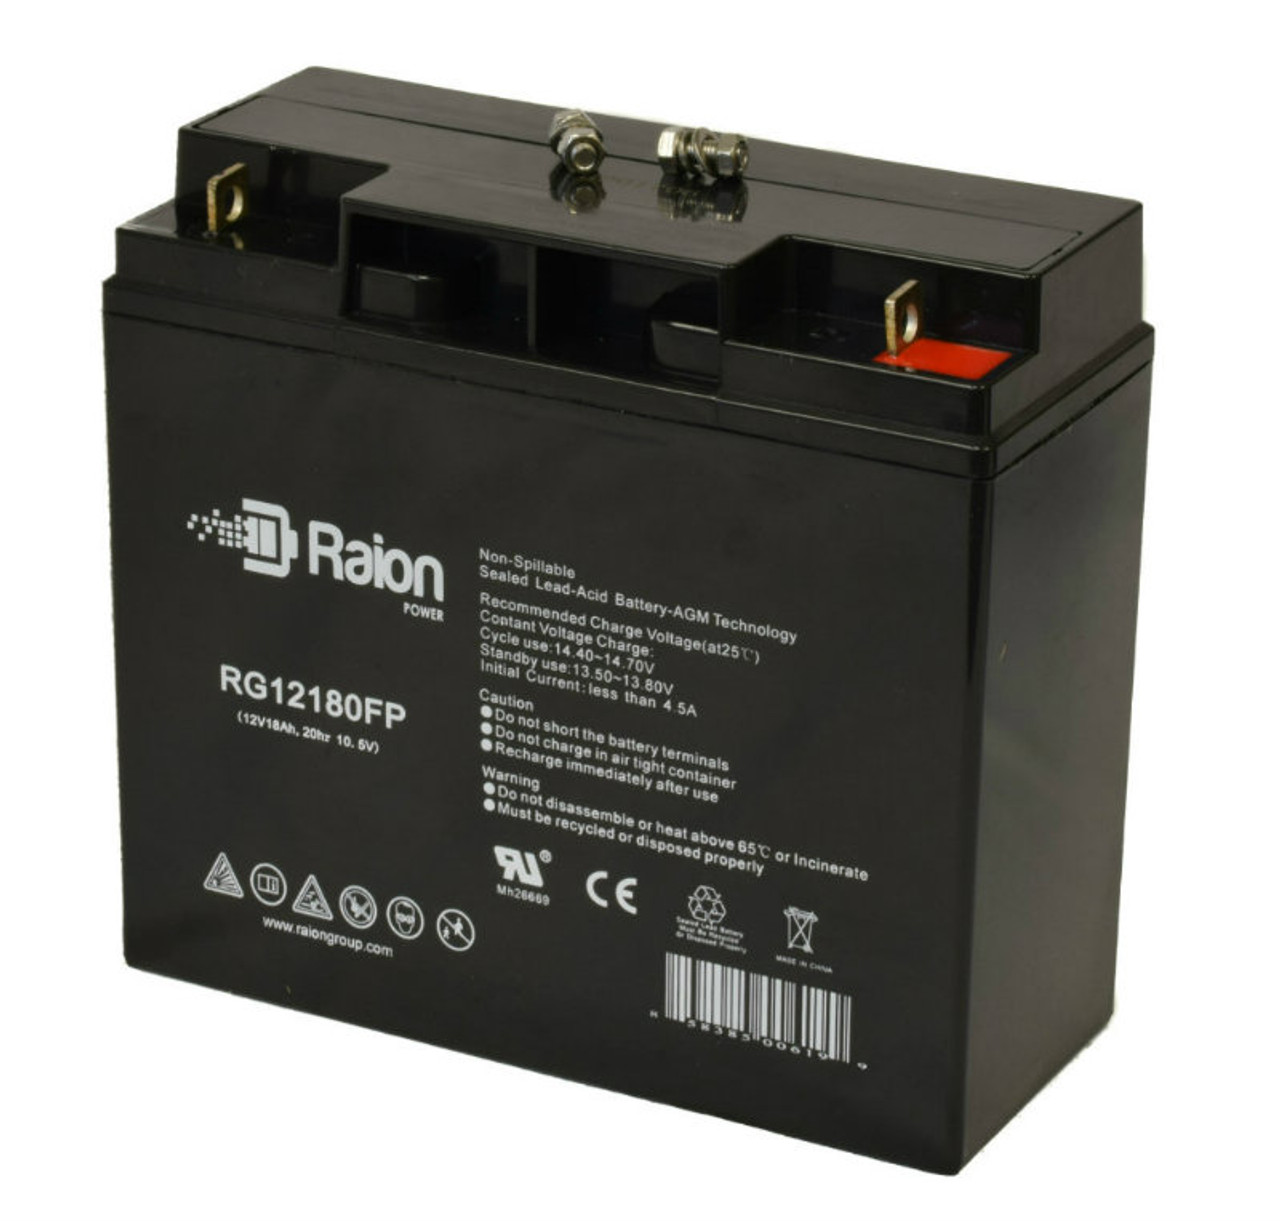 Raion Power Replacement 12V 18Ah Battery for Kaiying KS17-12A - 1 Pack